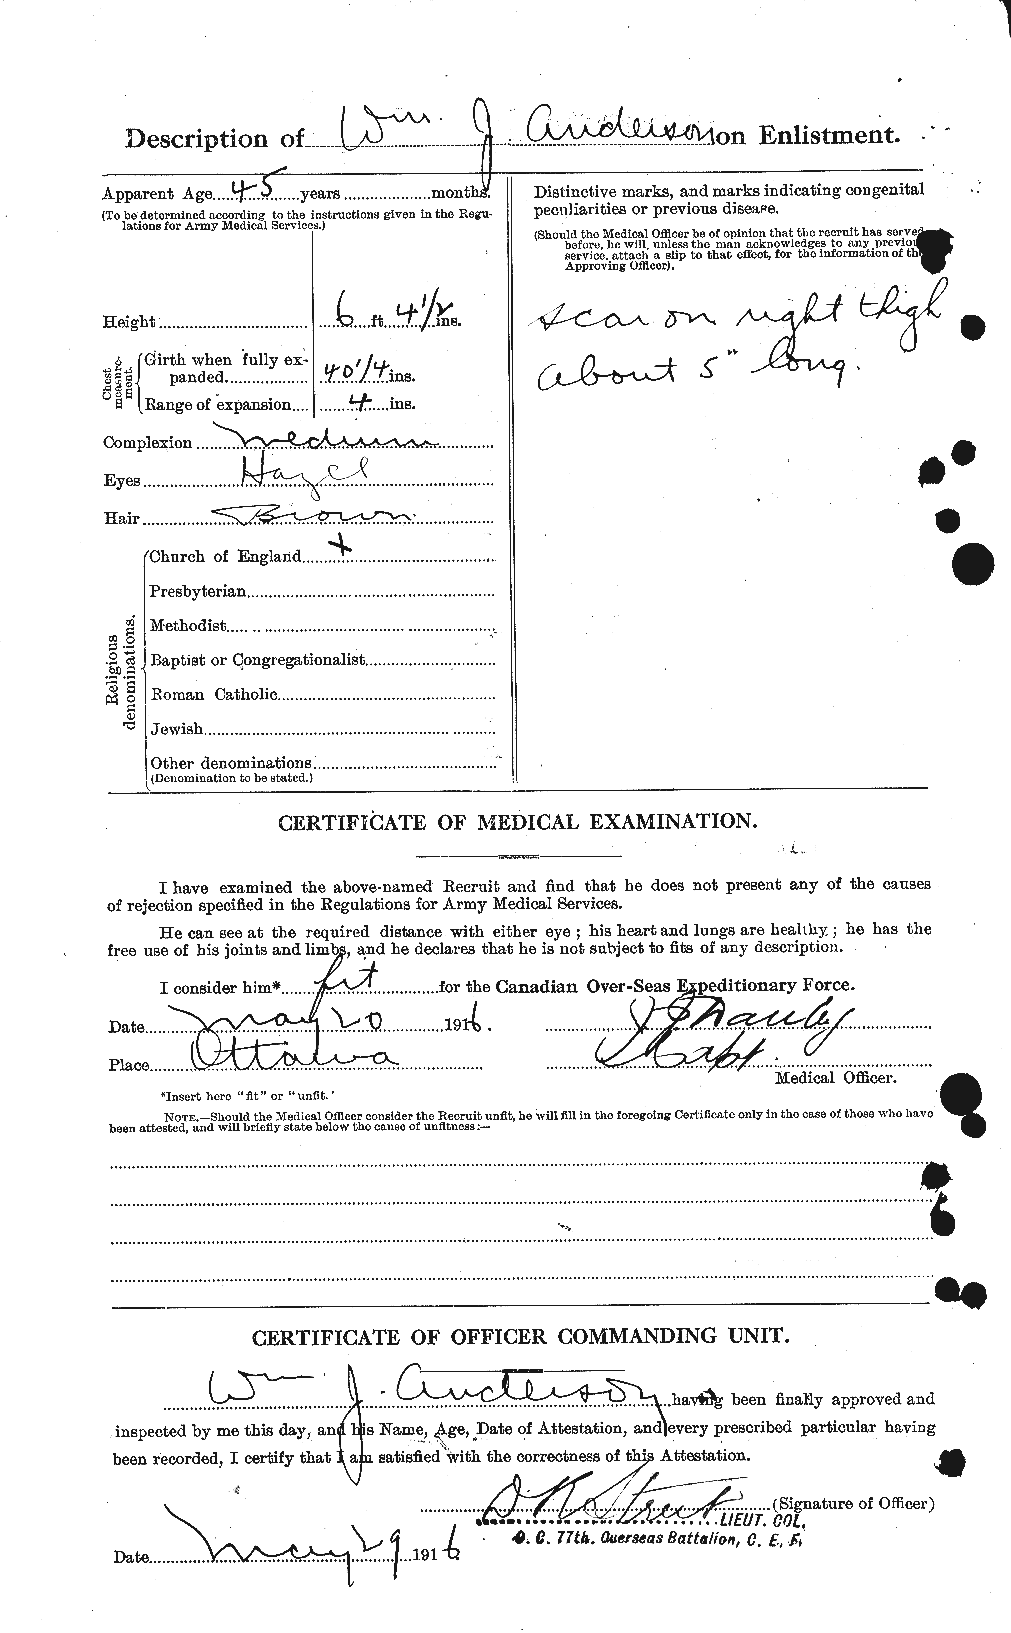 Personnel Records of the First World War - CEF 210696b